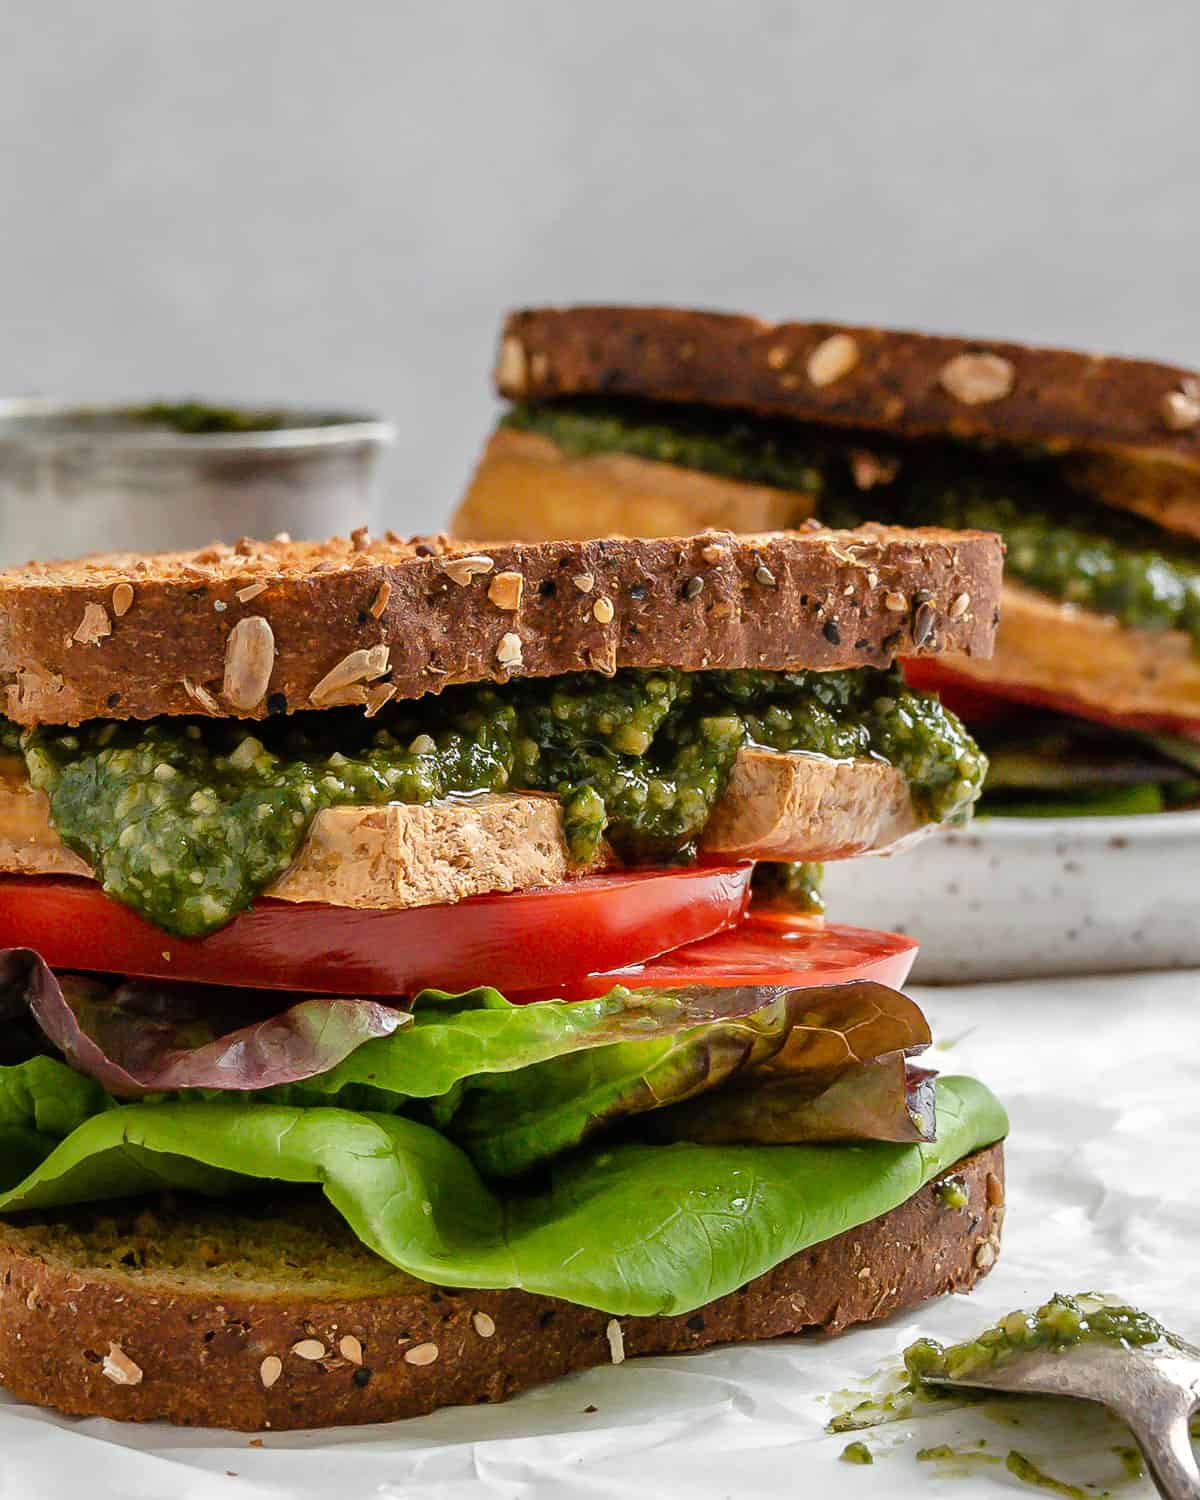 two completed Tofu and Pesto Sandwiches against a light surface